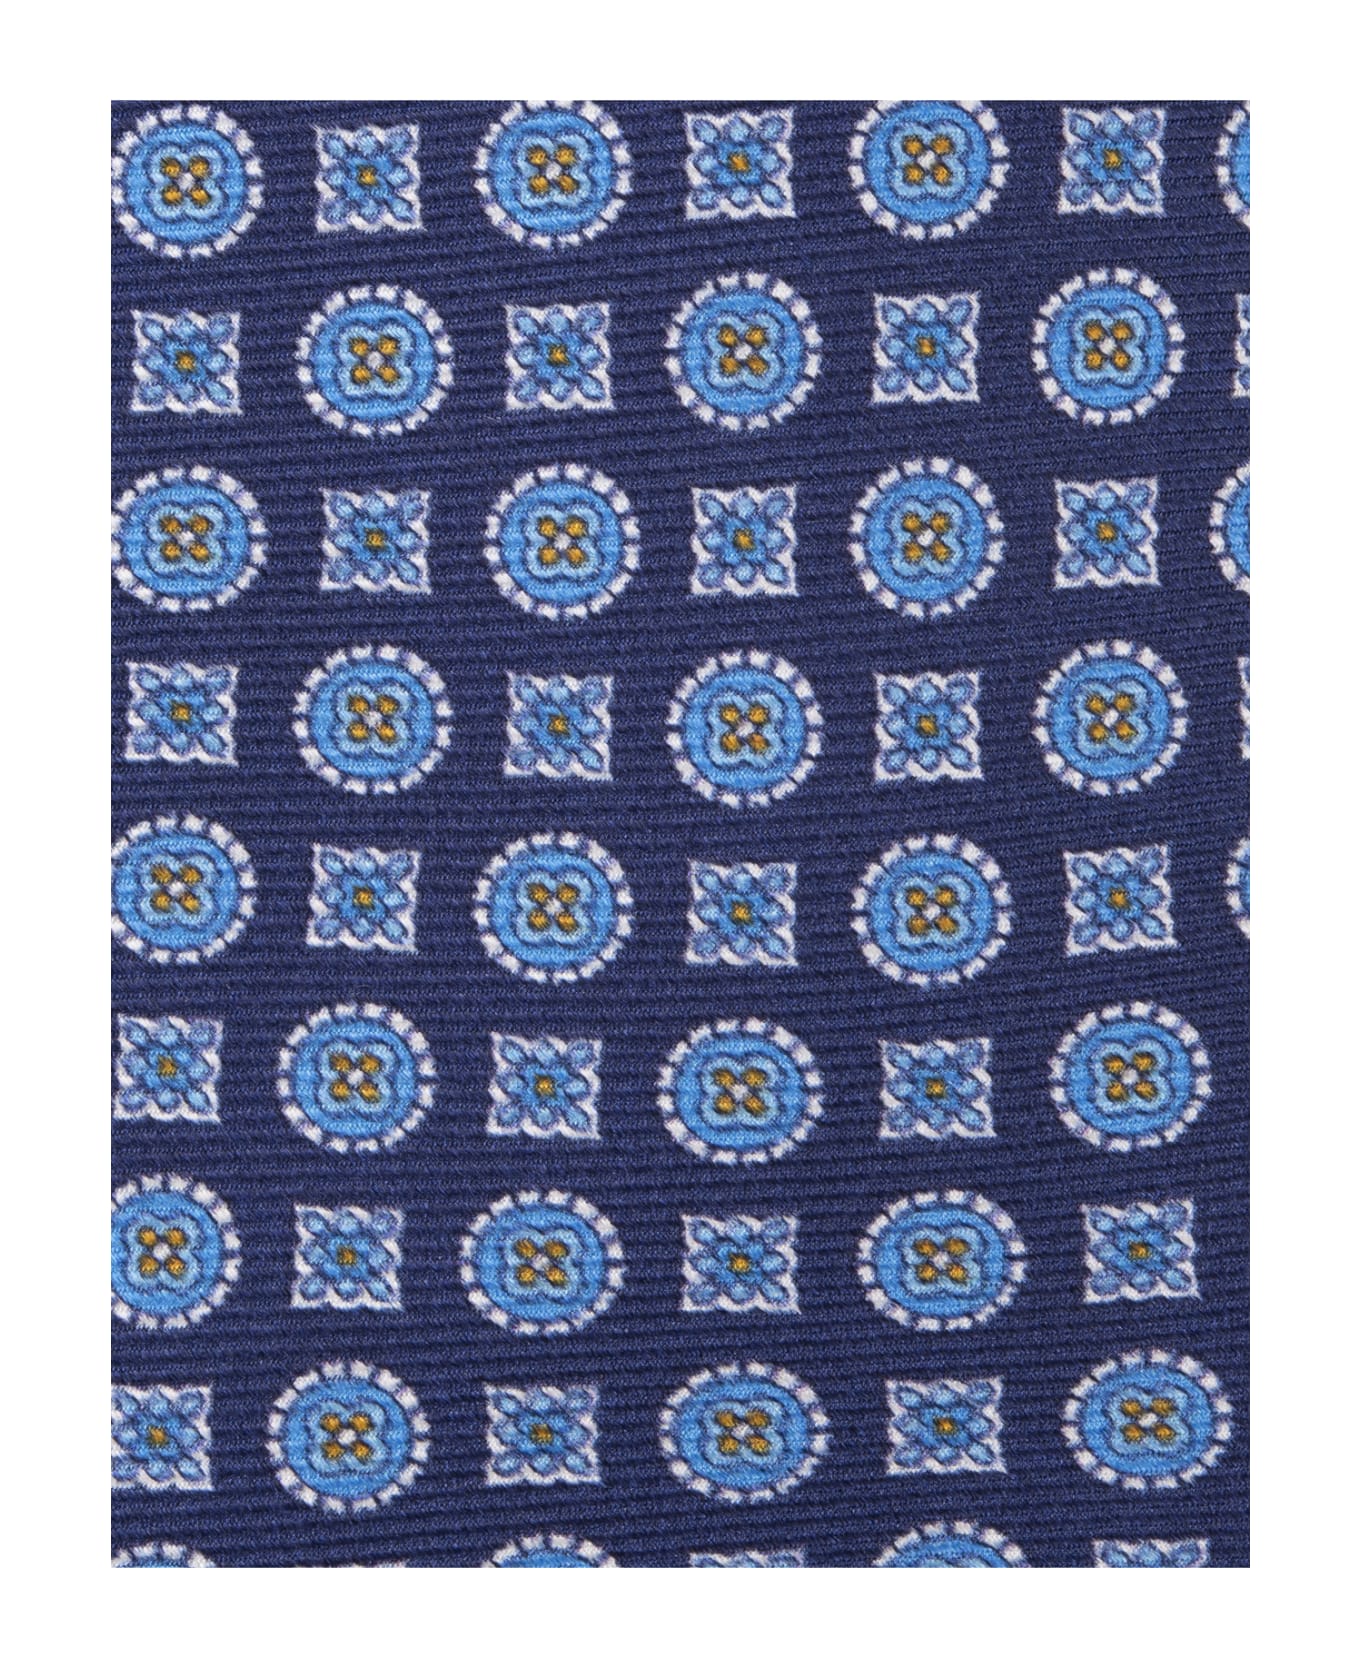 Kiton Blue Tie With Micro Pattern - Blue ネクタイ